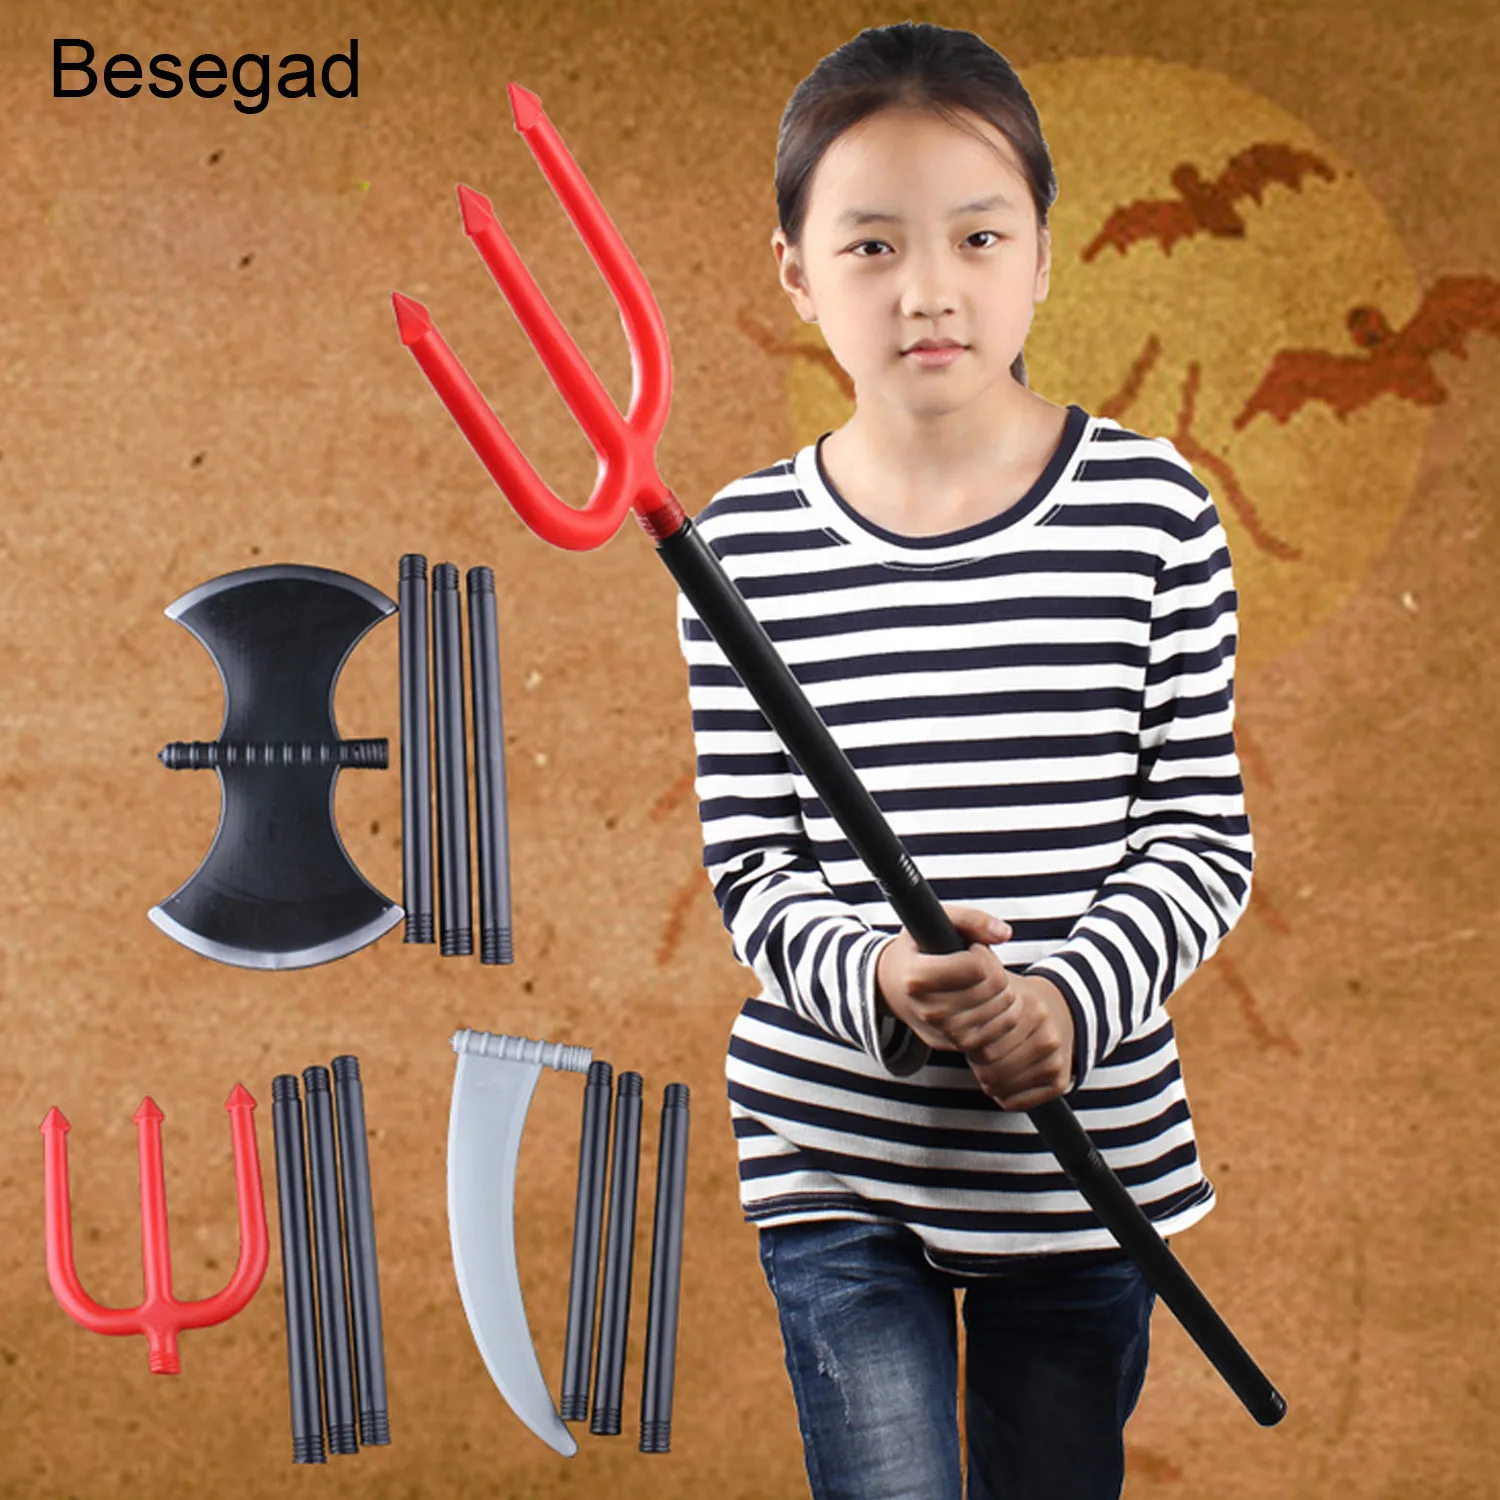 

Besegad 3PCS Adjustable Realistic Plastic Devil Weapons Set with Scythe Cattle Fork Axe for Halloween Party Carnivals Props